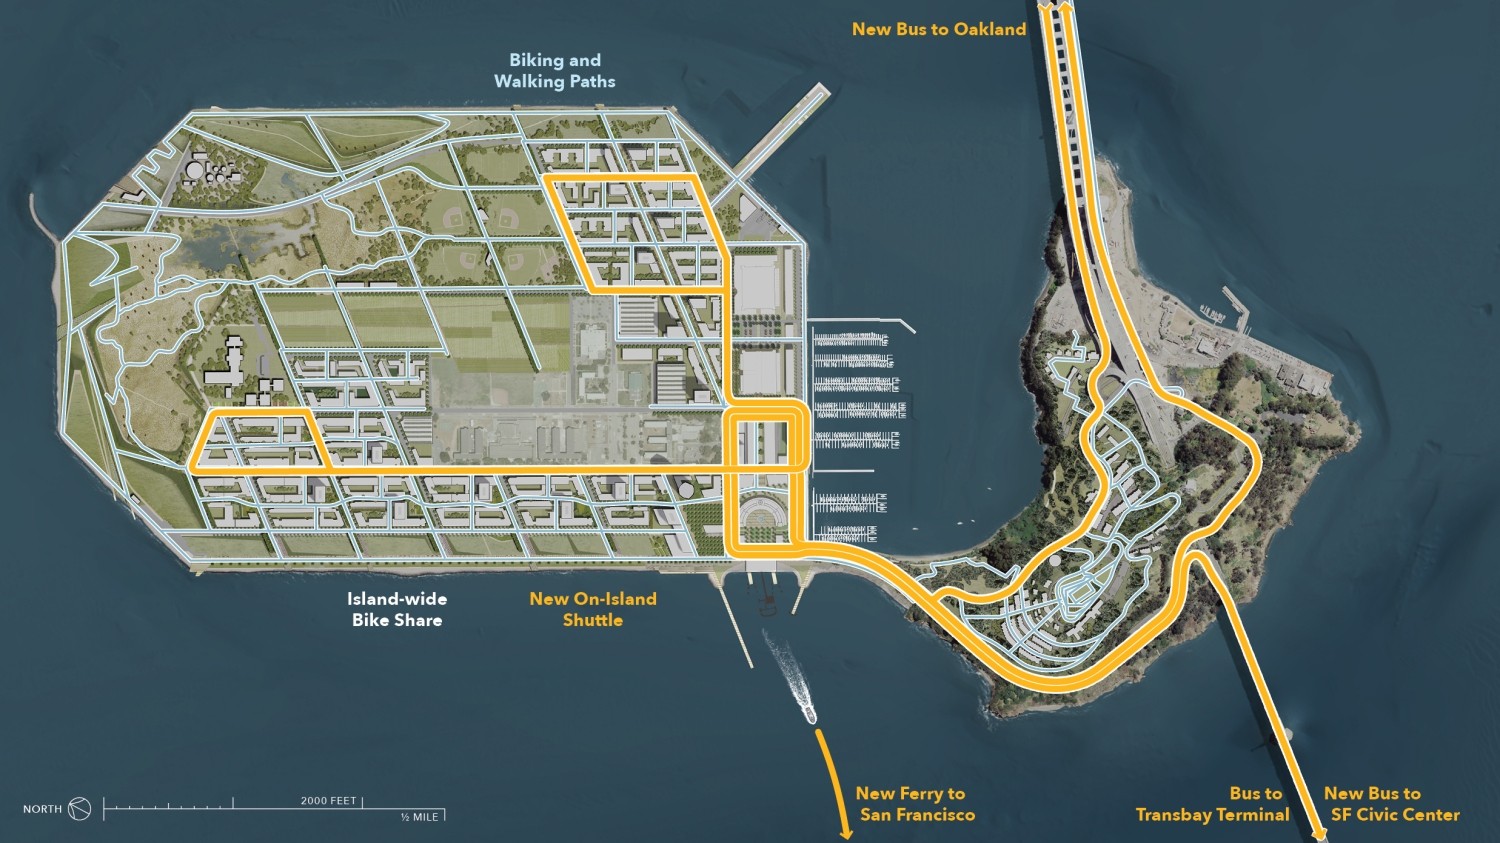 A map showing future transportation improvements on Treasure Island and Yerba Buena Island, including walking and biking paths throughout the islands, a shuttle on Treasure Island, ferry service to Downtown San Francisco from a new terminal on Treasure Island, new bus service between the new ferry terminal and Downtown Oakland, new bus service between the new ferry terminal and San Francisco Civic Center, and improved bus service between the new ferry terminal and the Salesforce Transit Center.